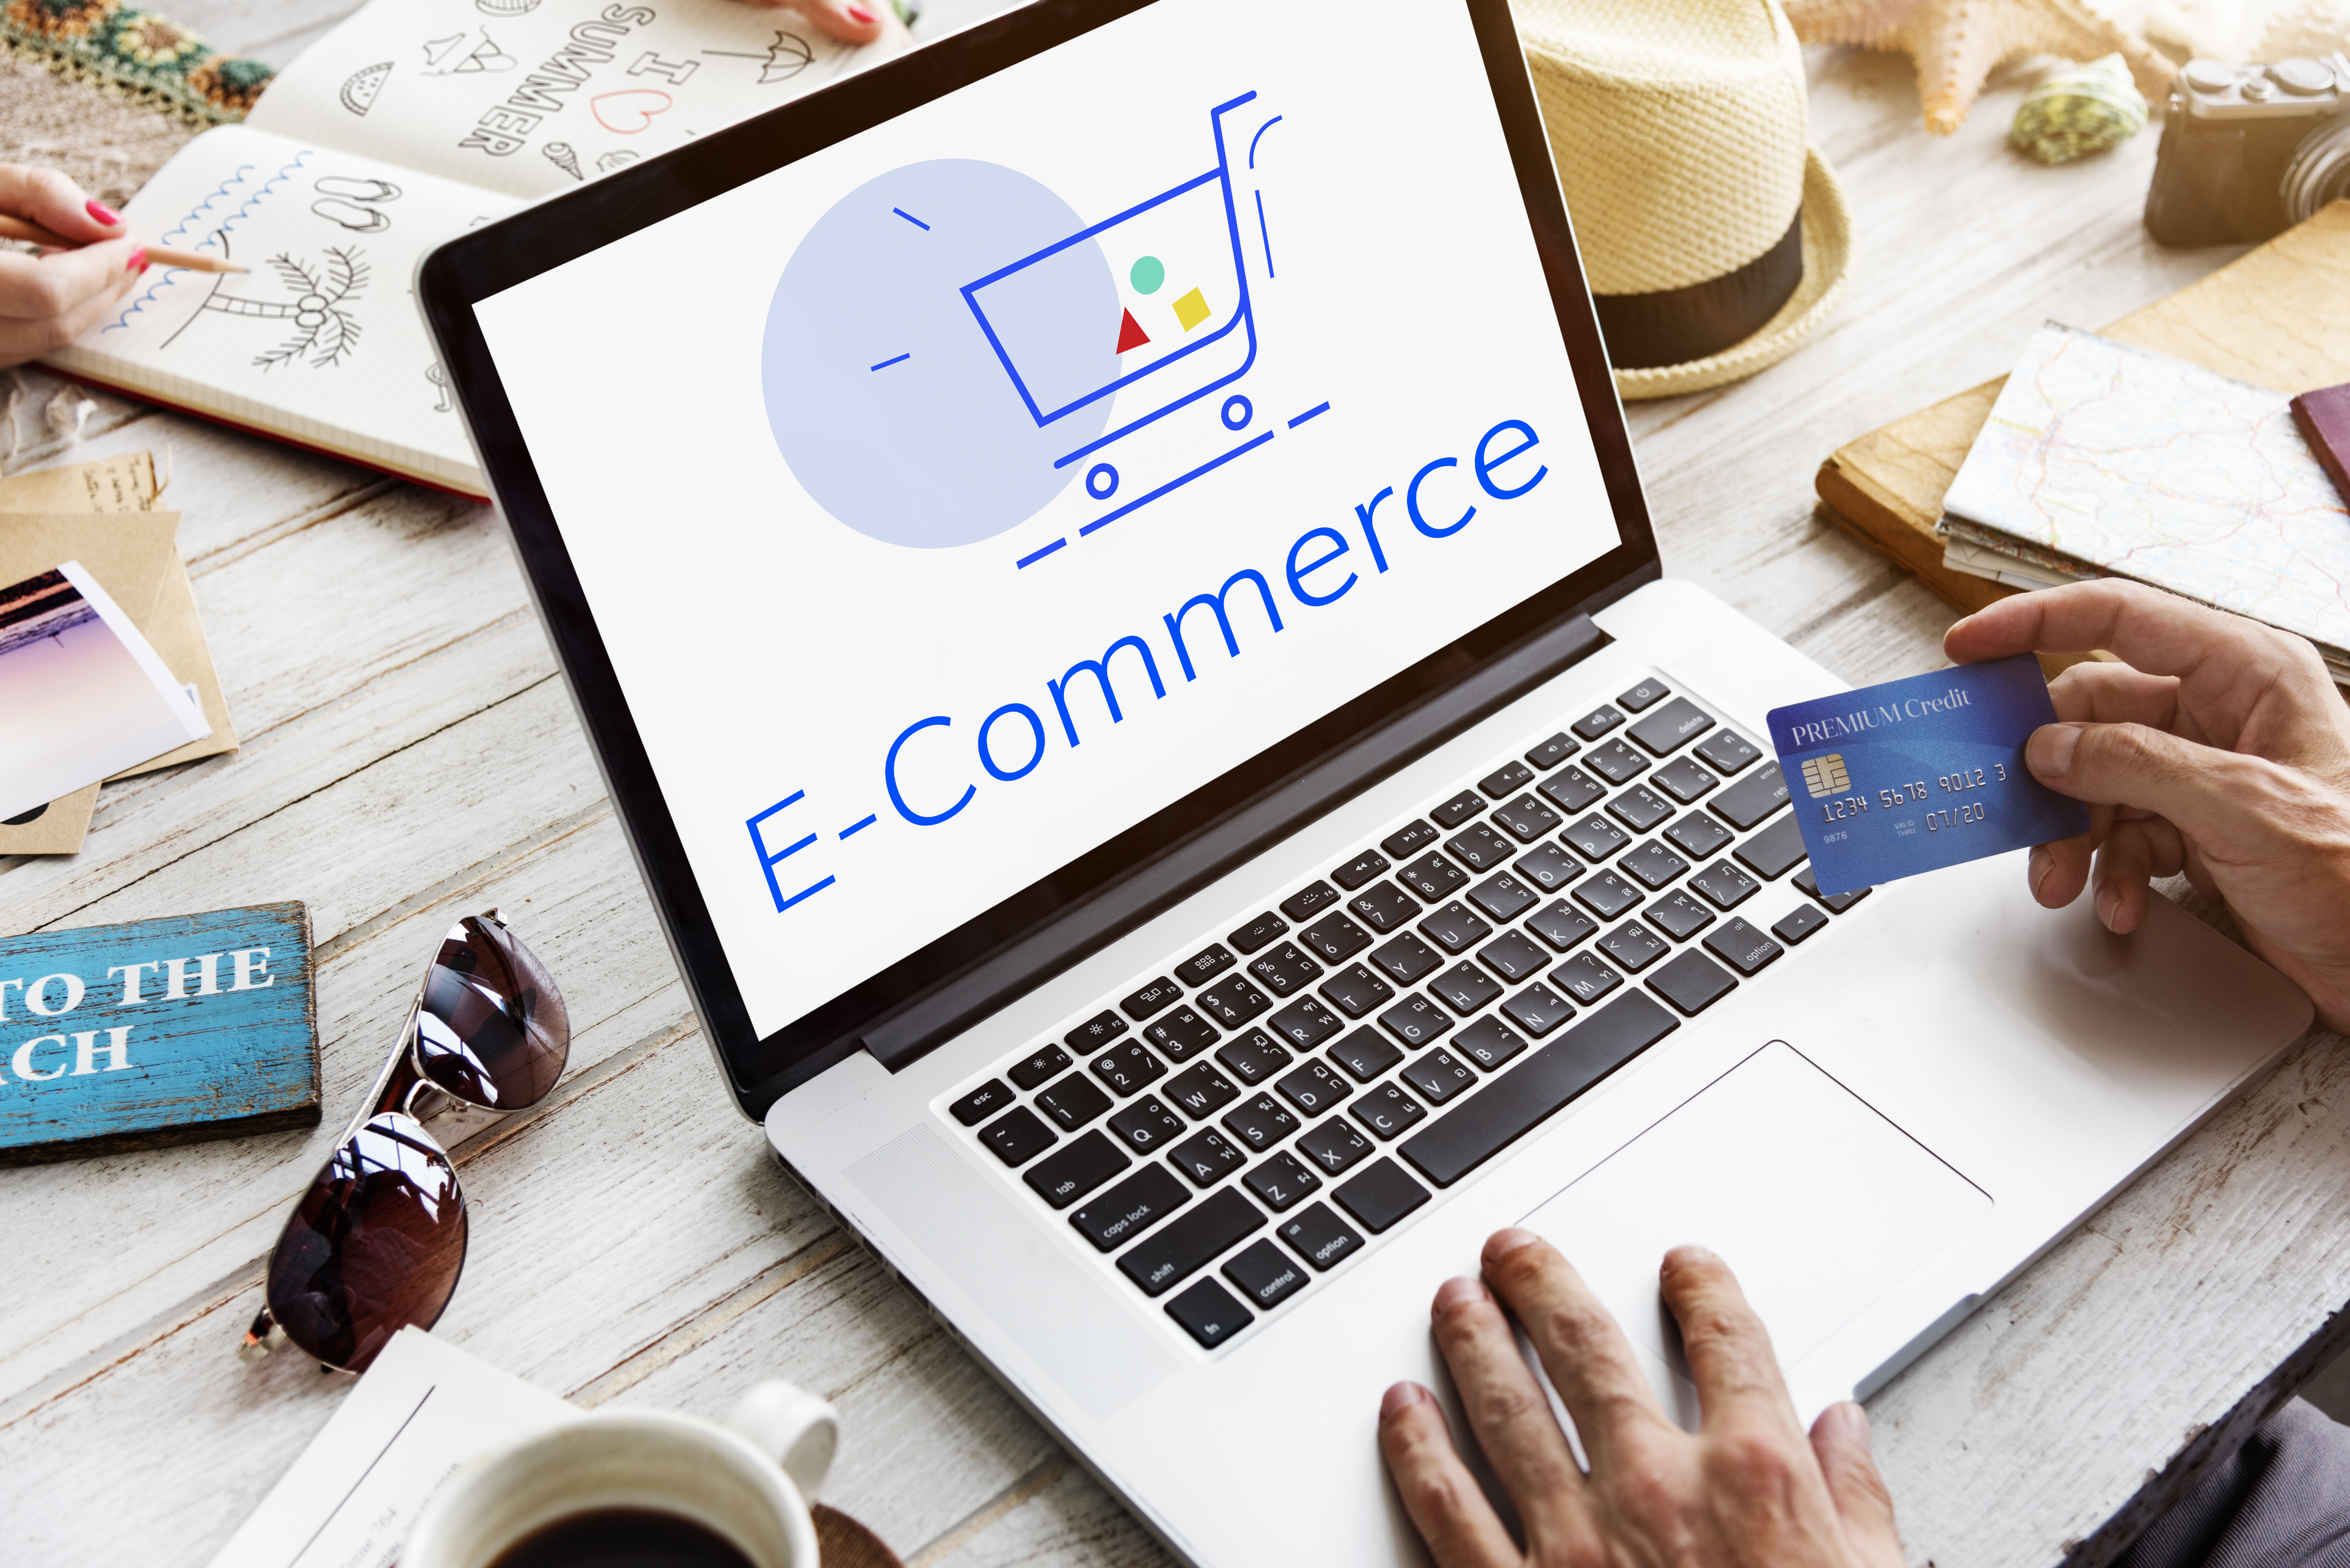 Benefits and drawbacks of starting an ecommerce business